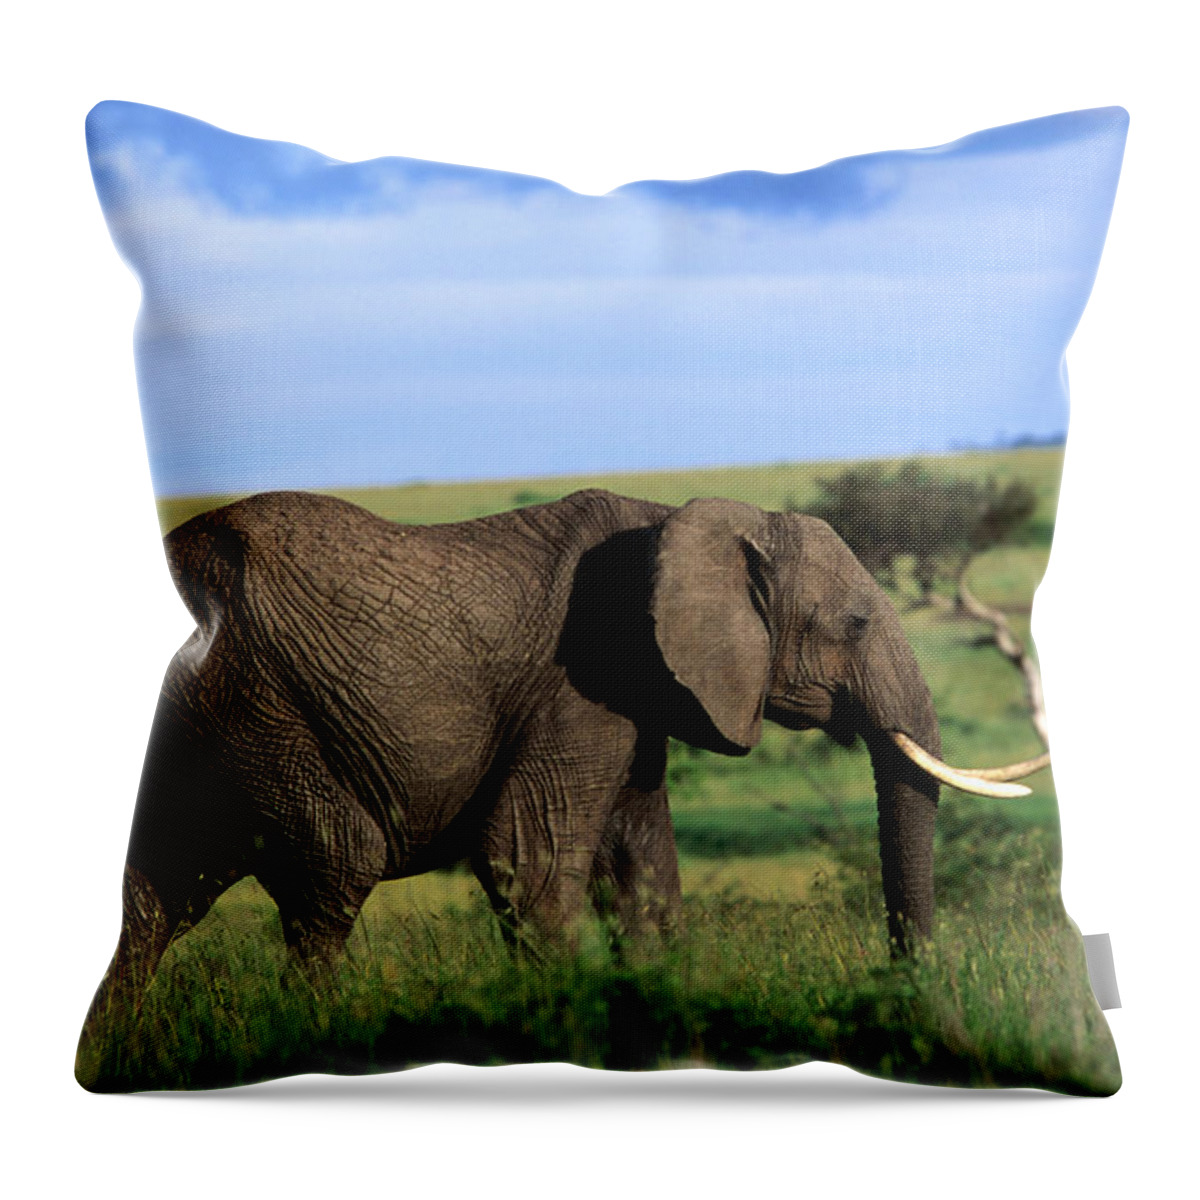 Kenya Throw Pillow featuring the photograph The African Elephant Loxodonta Africana by Anders Blomqvist